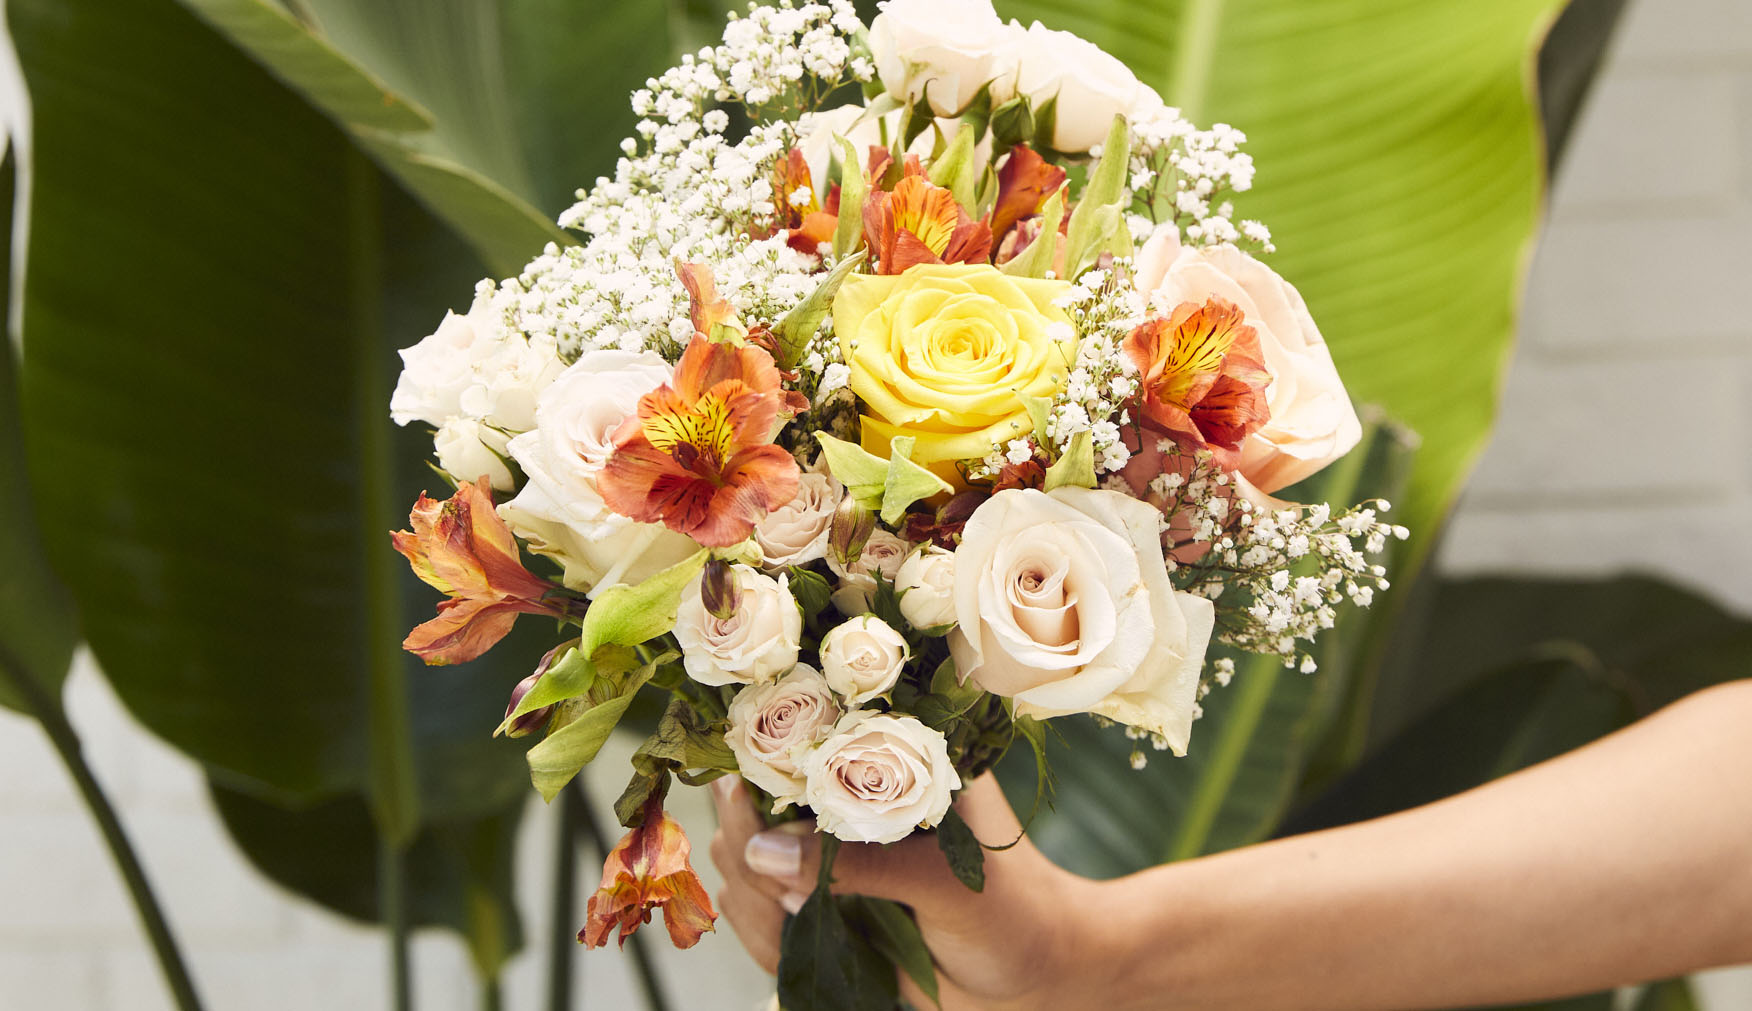 Beautiful fall floral arrangement containing orange and white flowers